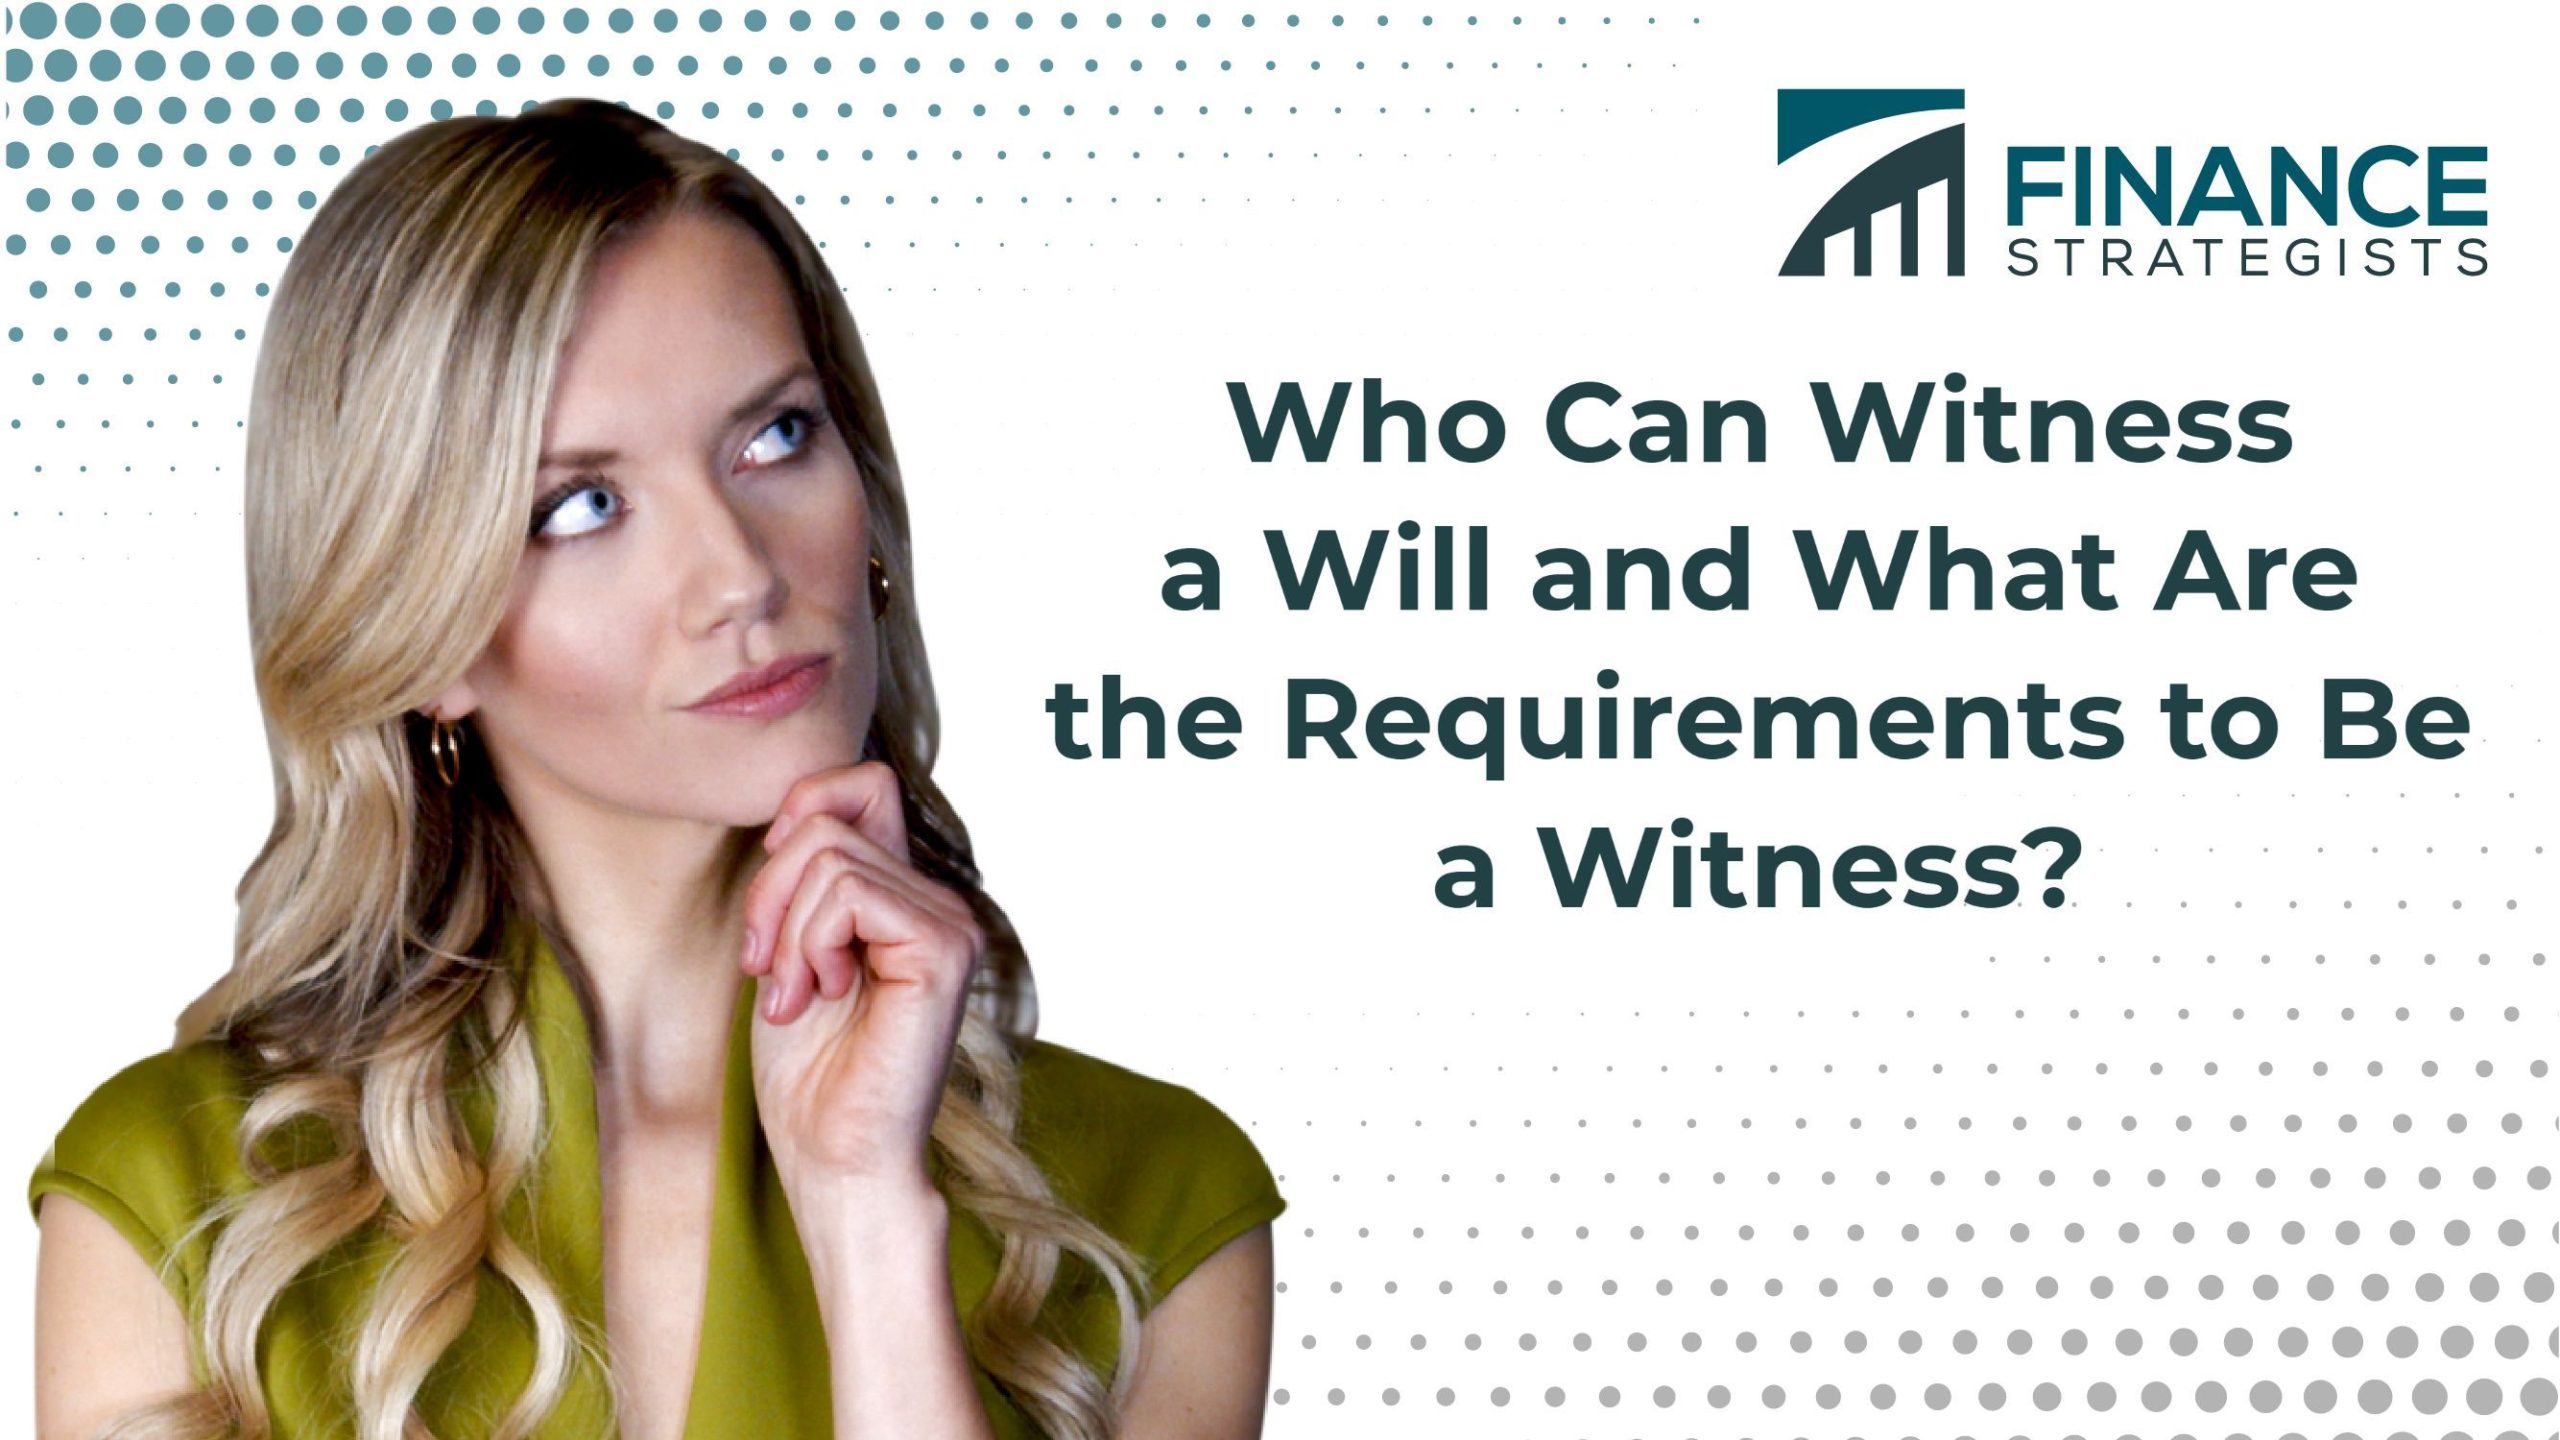 who-can-witness-a-will-witness-requirements-finance-strategists